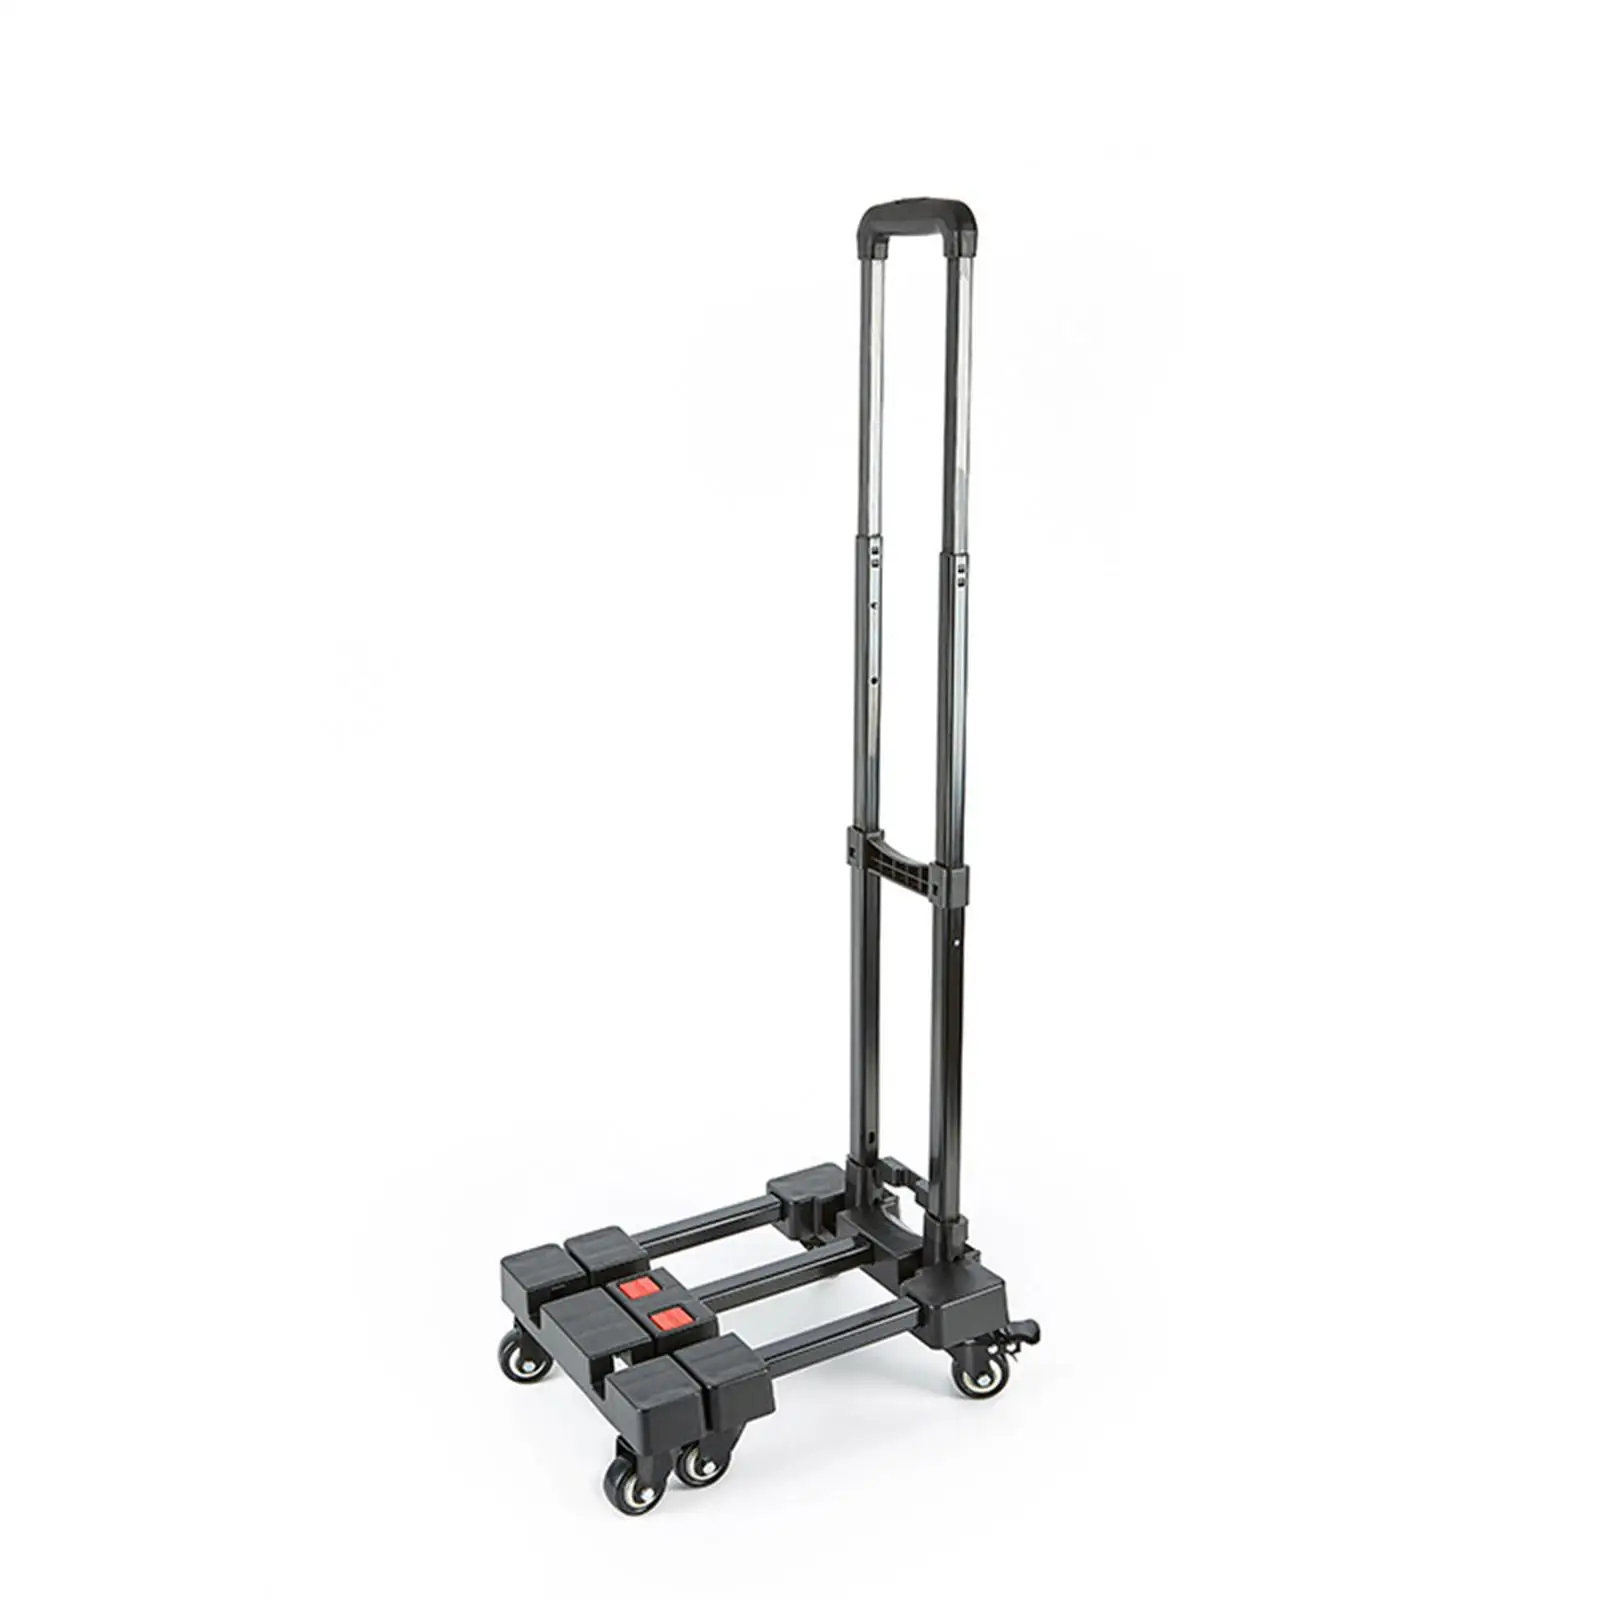 Folding Hand Truck with Adjustable Handle Shopping Cart for Easy Moving Outdoor Houshold Office Maximum Load 100kg (220lb)